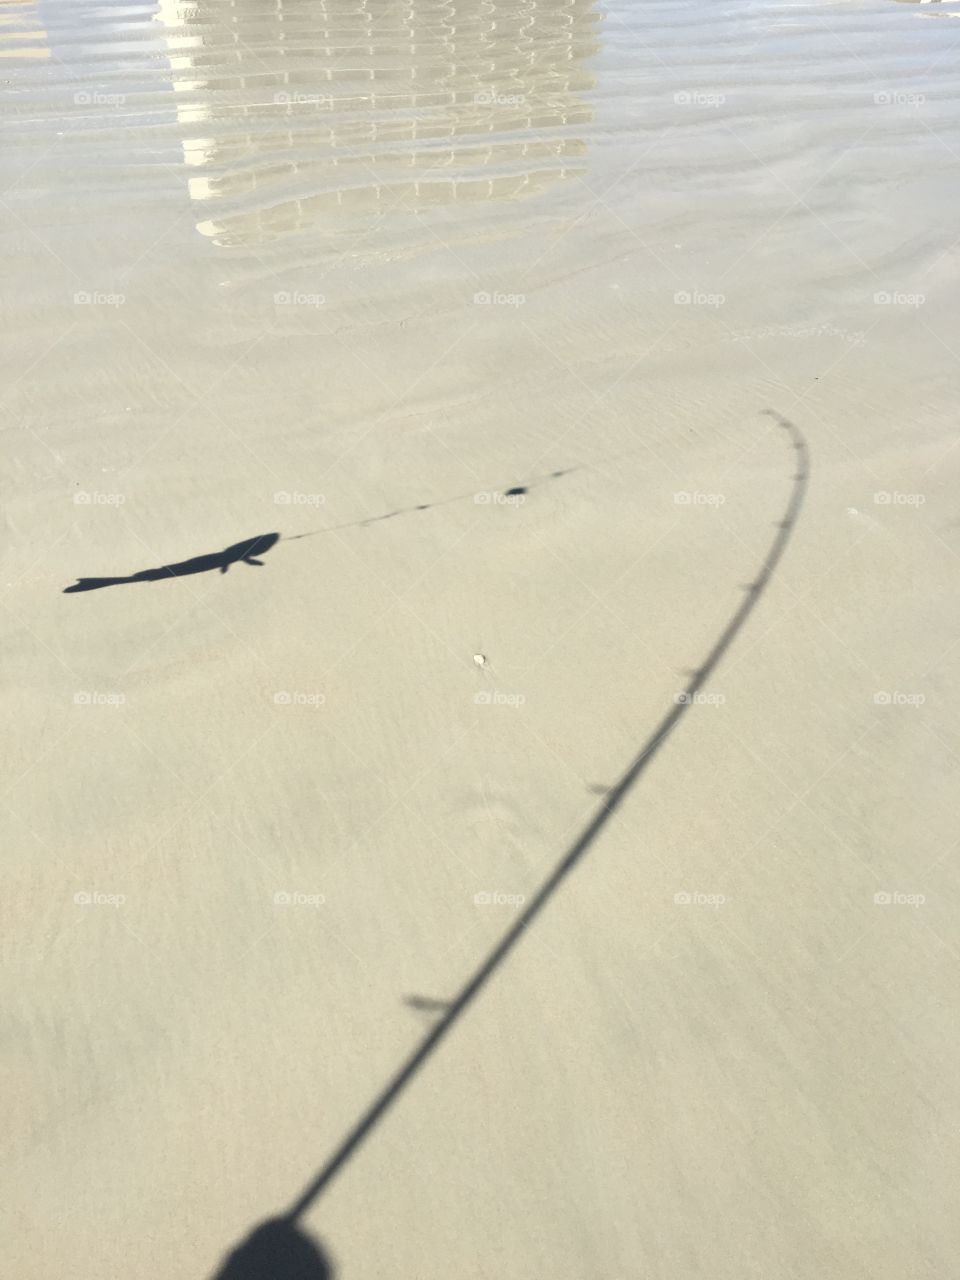 Shadow of a fish